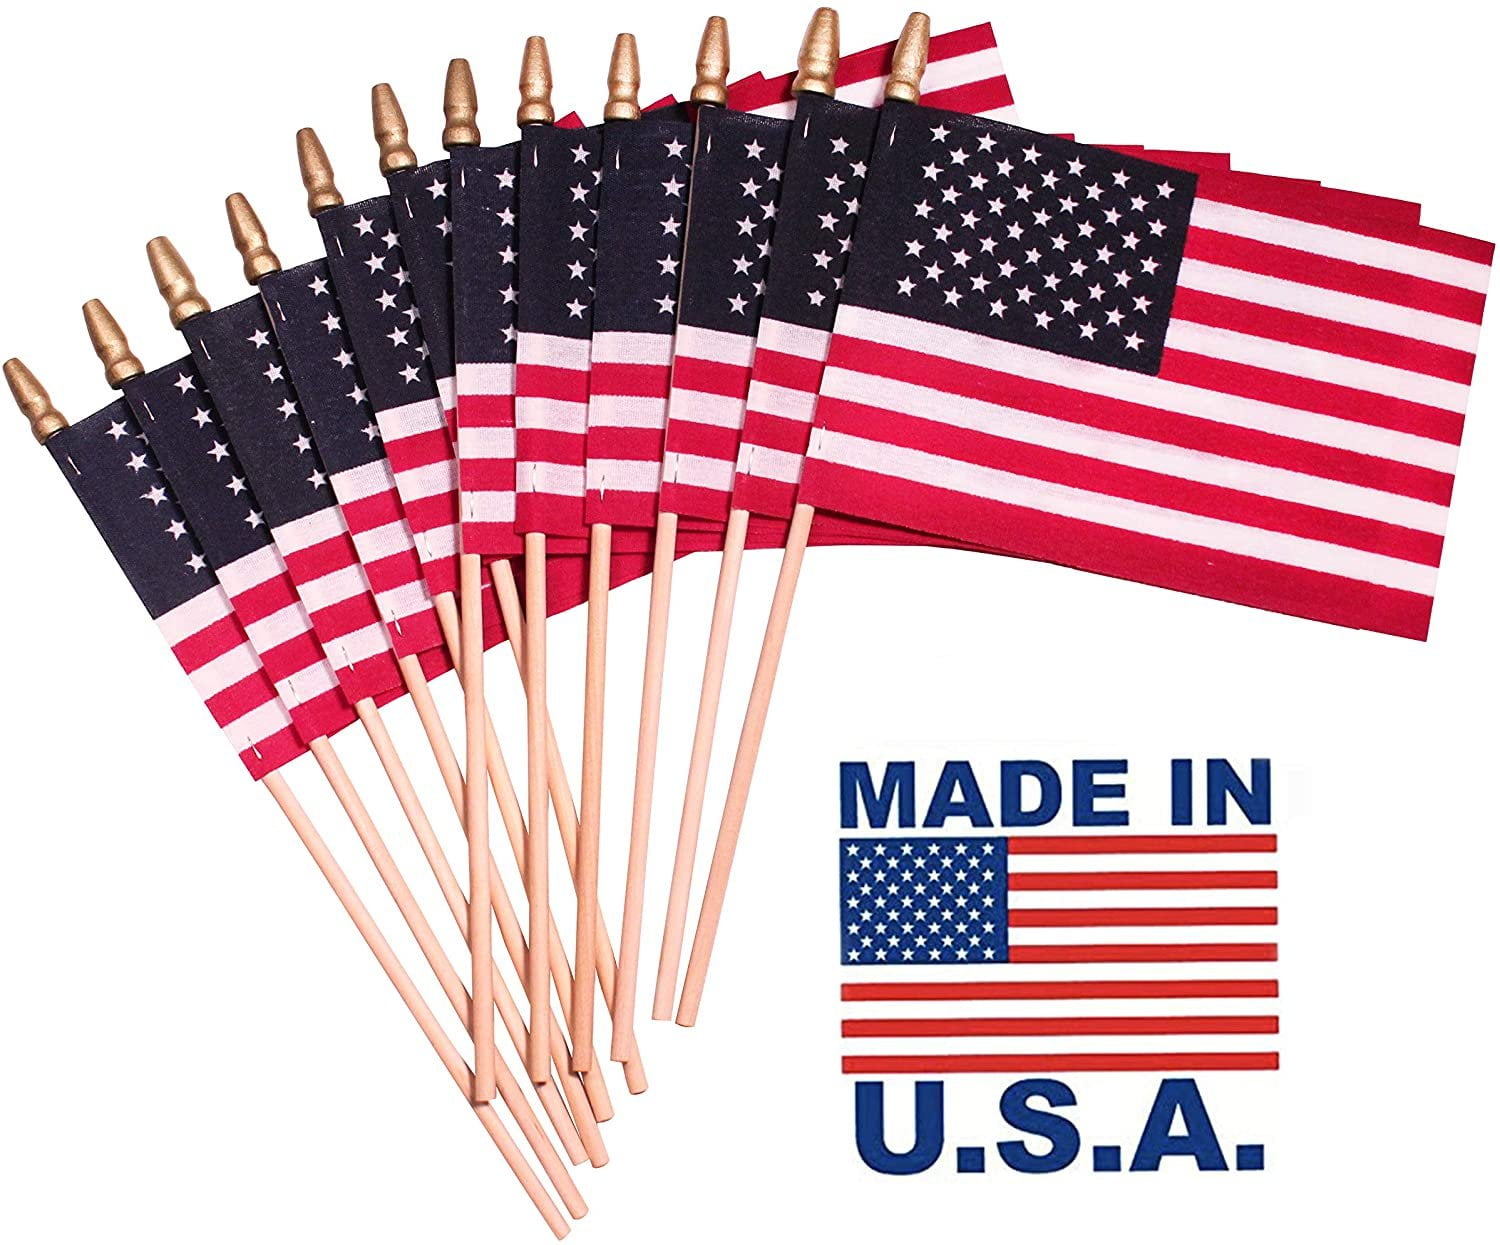 Handheld Spearhead American Flags - 12 x 18 inch. Handheld Stick Flags with  SpearTop Great for Patriotic Decorations or Celebrations. Made in the USA